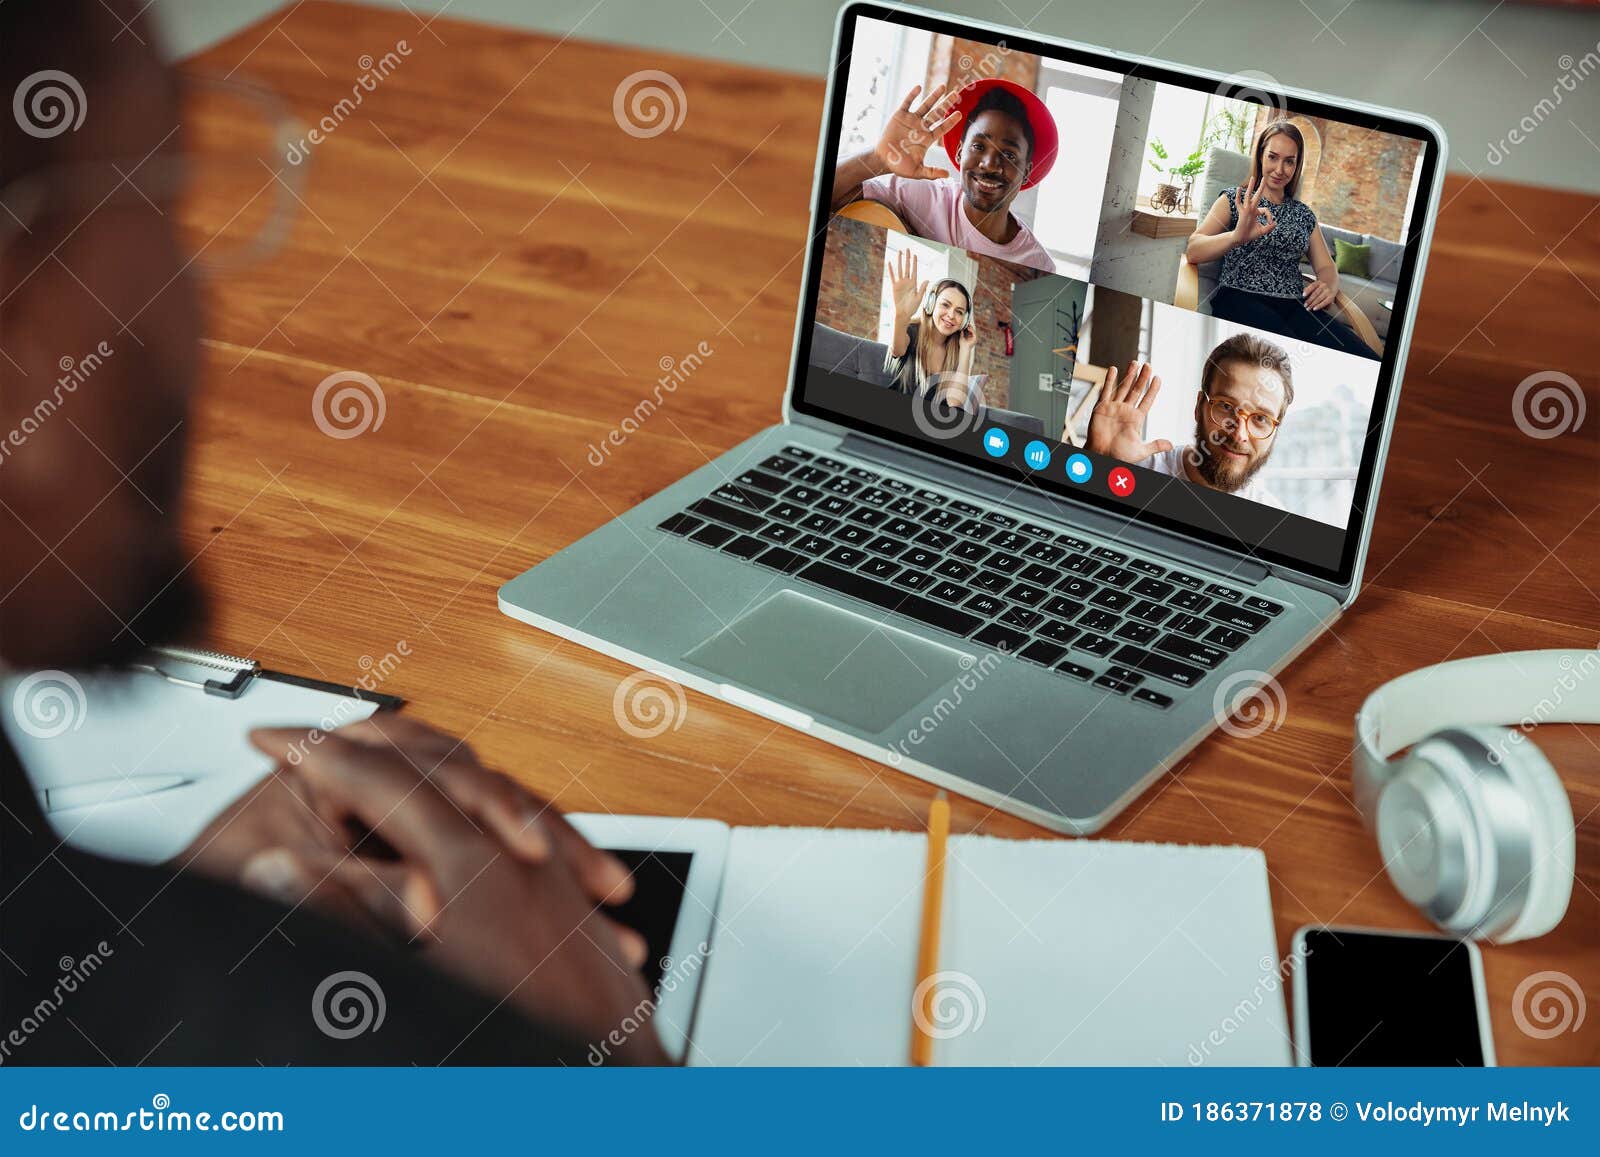 man participate video conference looking at laptop screen during virtual meeting, videocall webcam app for business